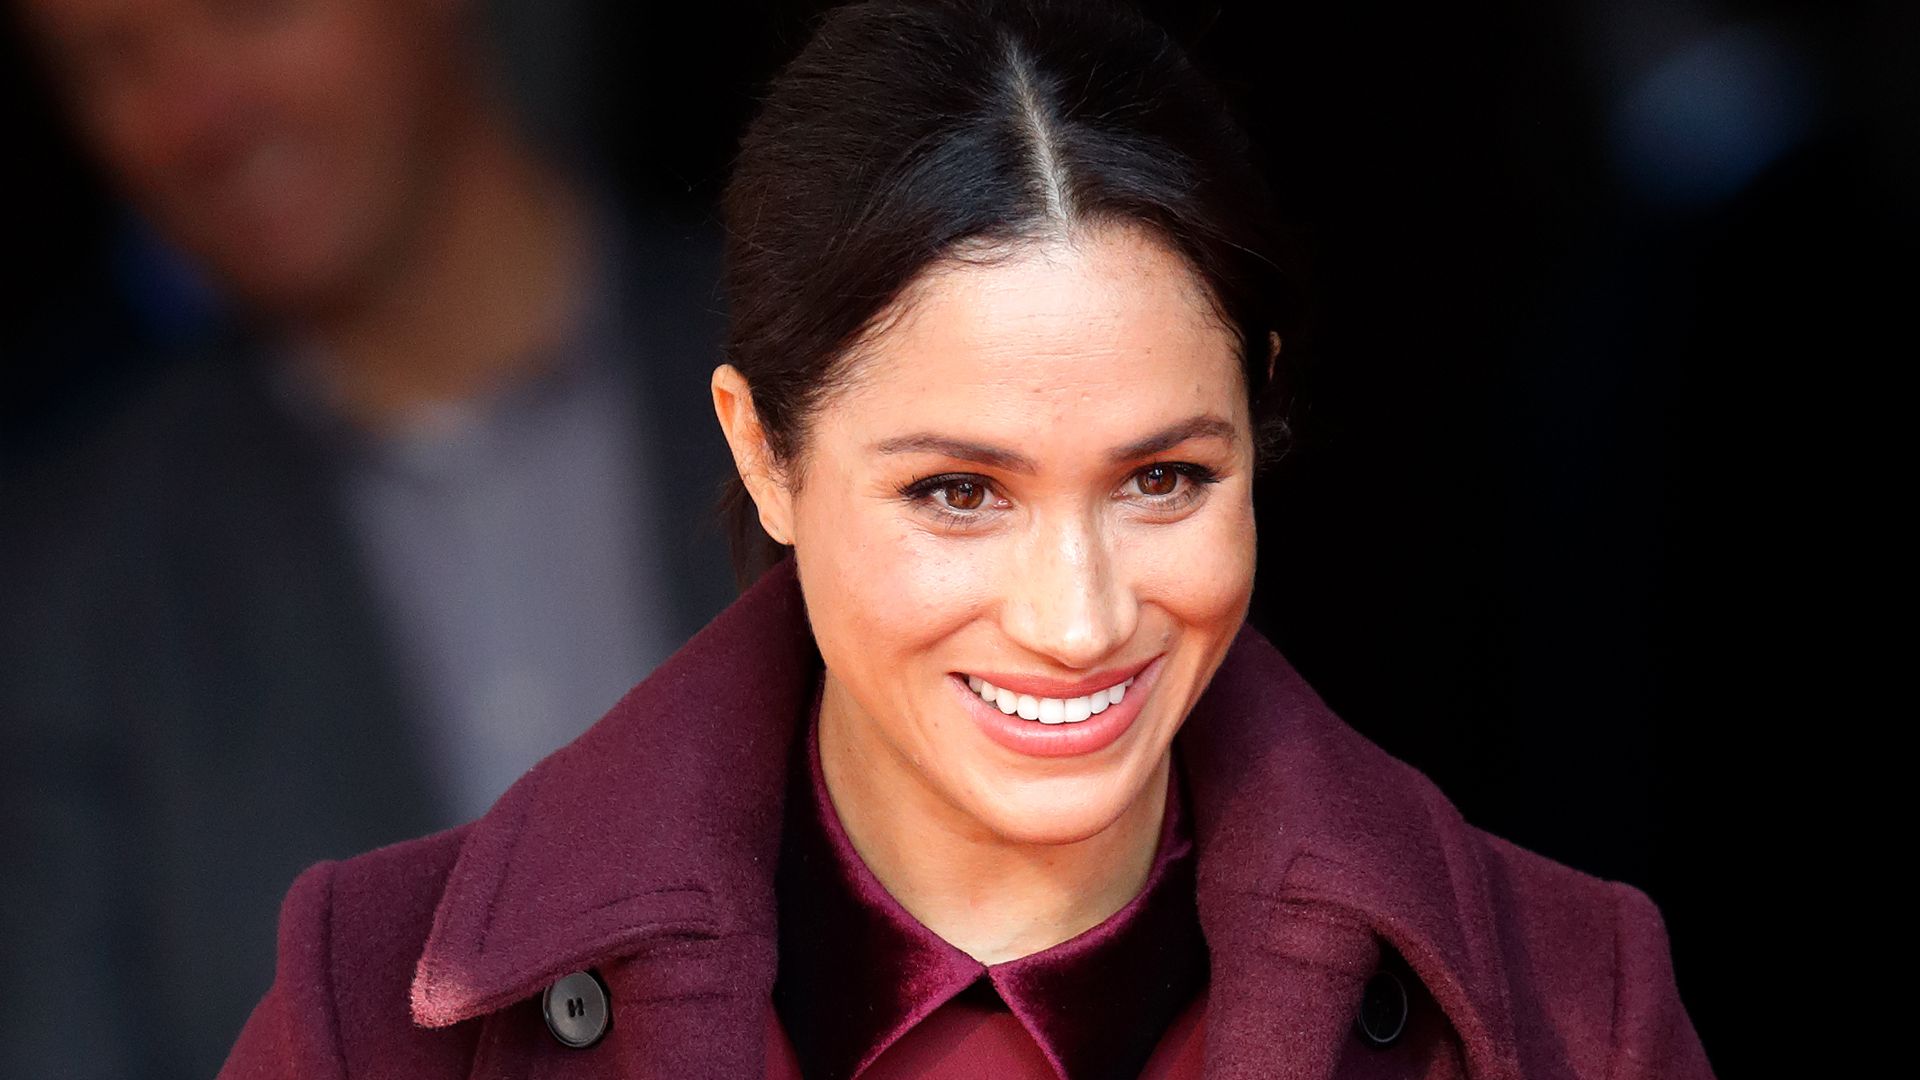 Meghan Markle smiles wearing a red coat